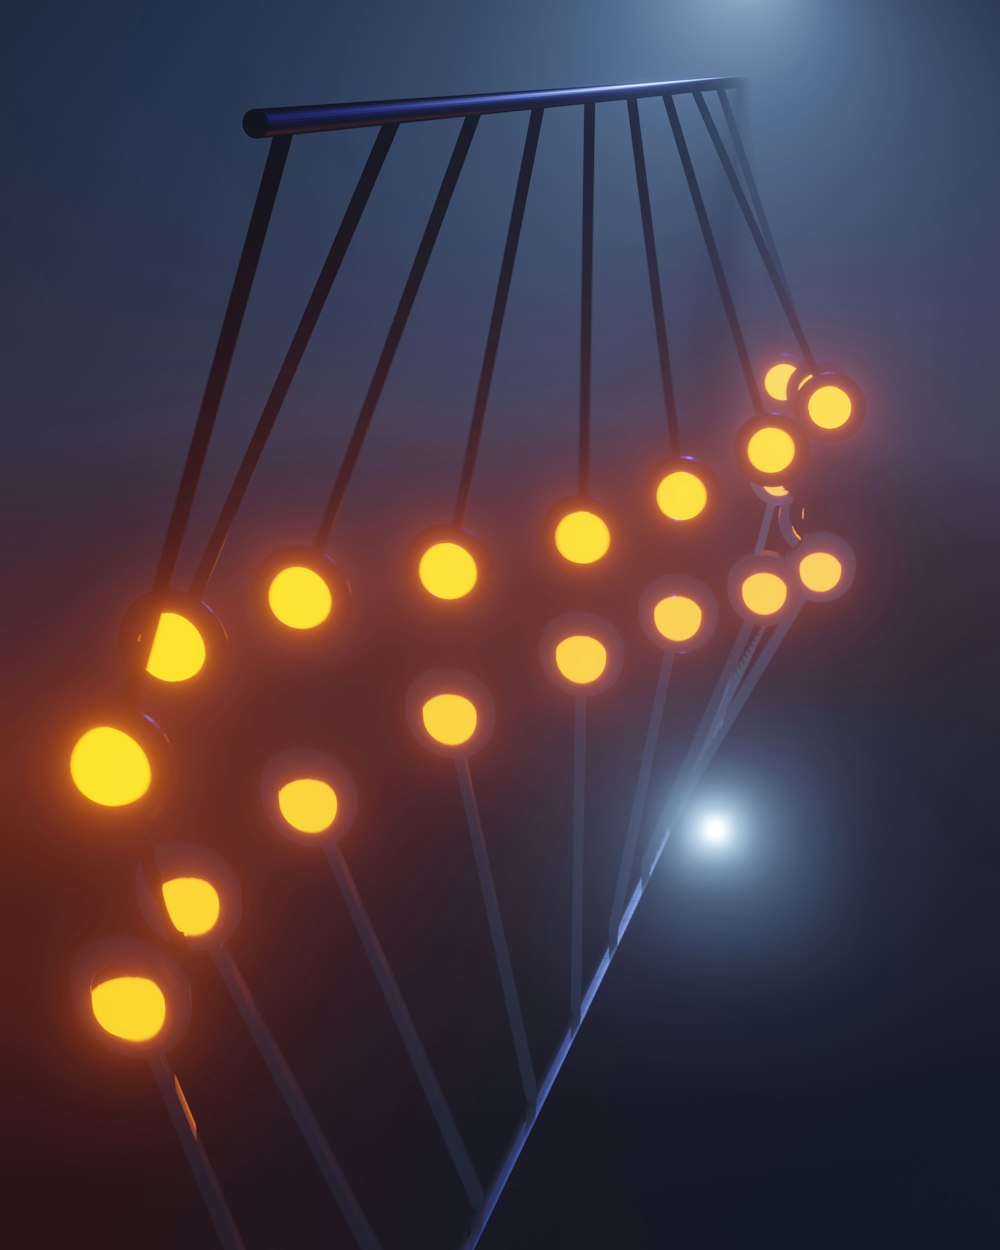 a bunch of lights that are on some kind of pole